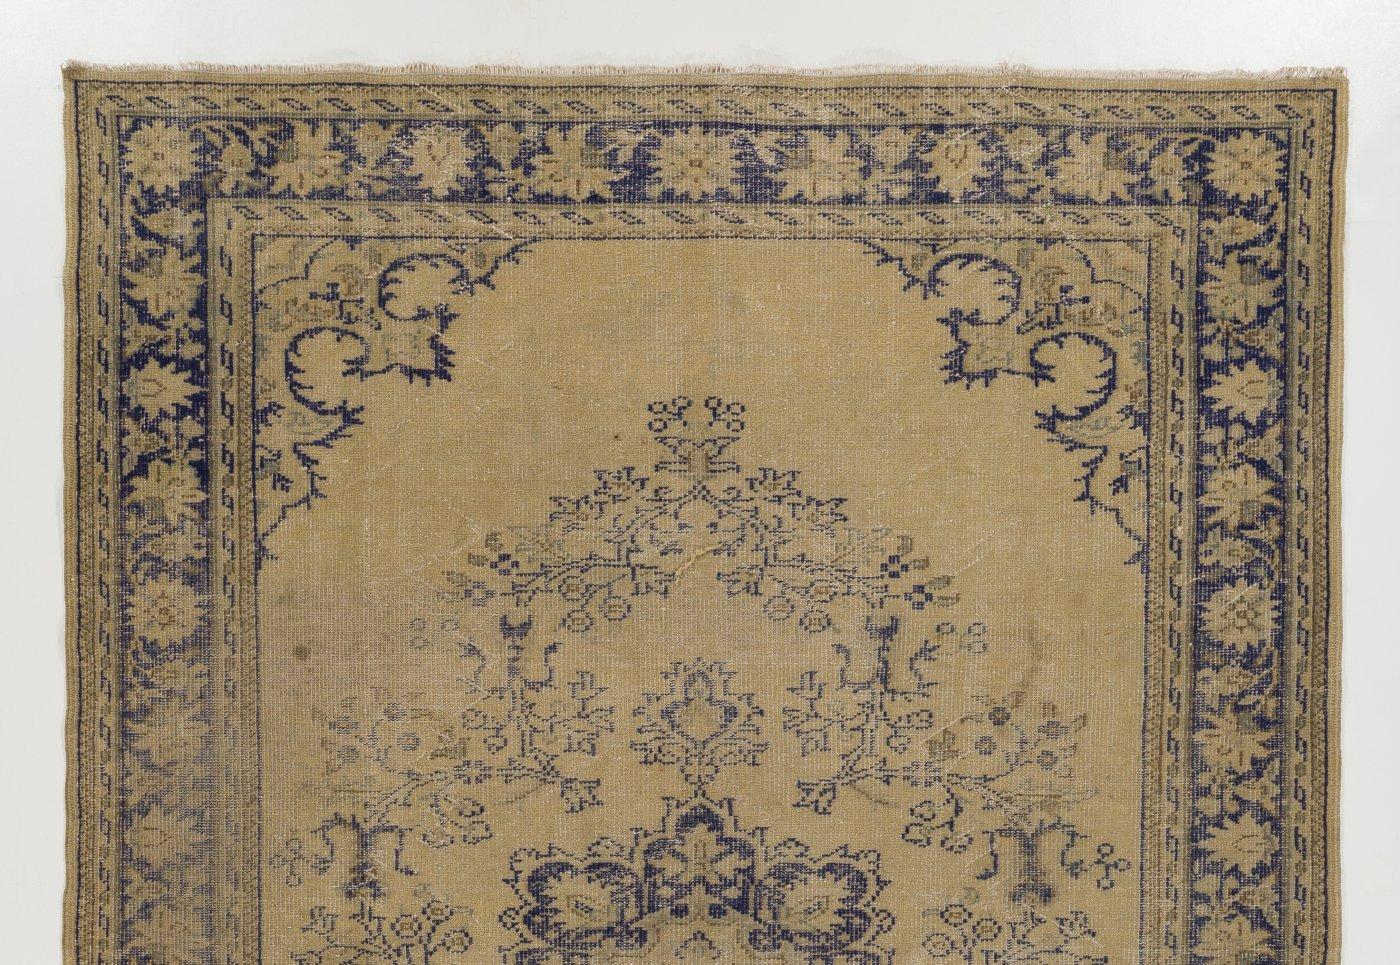 A vintage hand-knotted Turkish Oushak rug from the 1960s with distressed low wool pile on cotton foundation. It features a central medallion in indigo blue against a golden sand colored background decorated with scrolling leafy vines as well as a